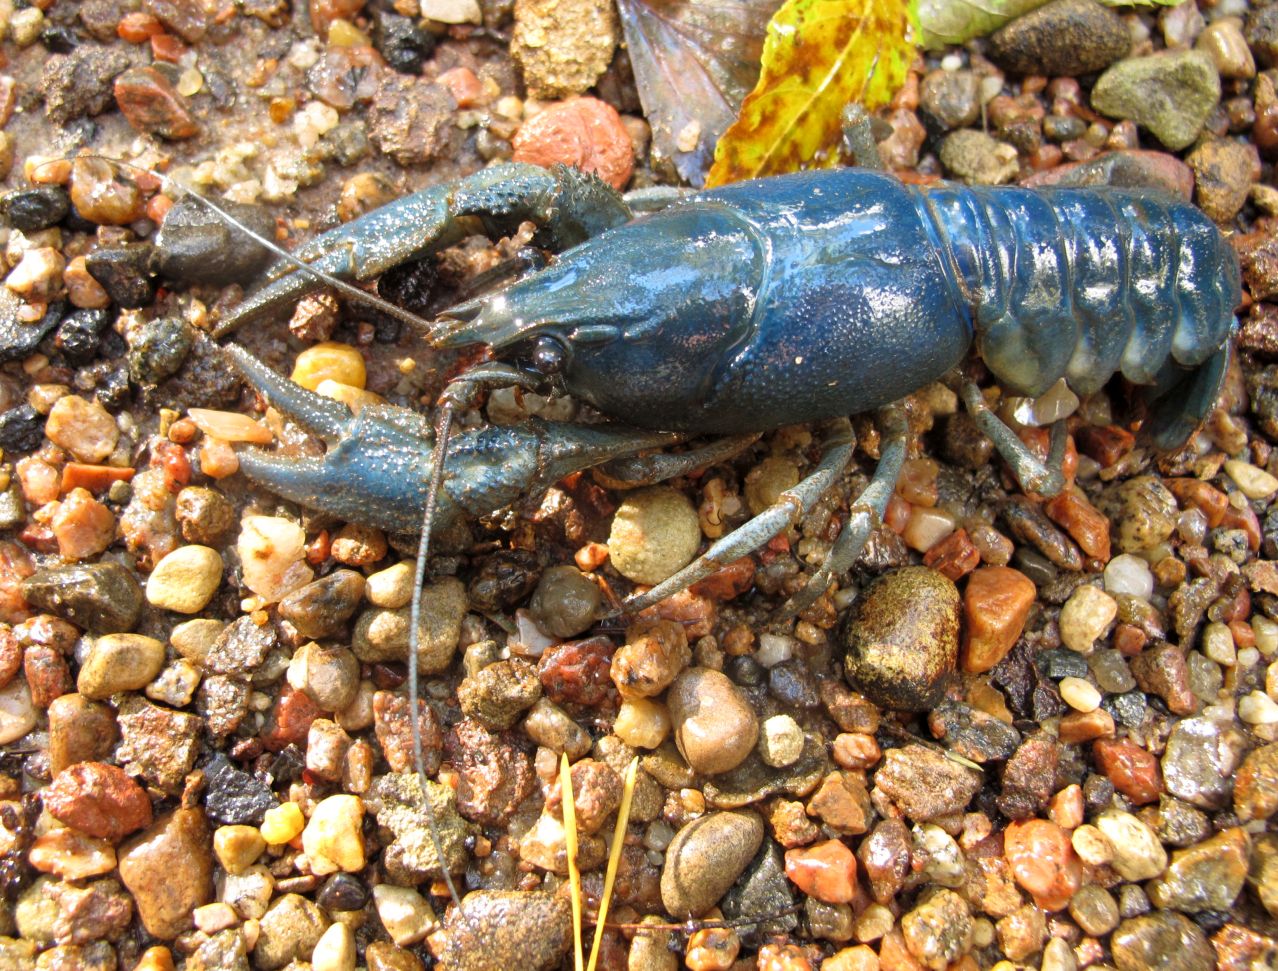 Why some crayfish has blue coloration?